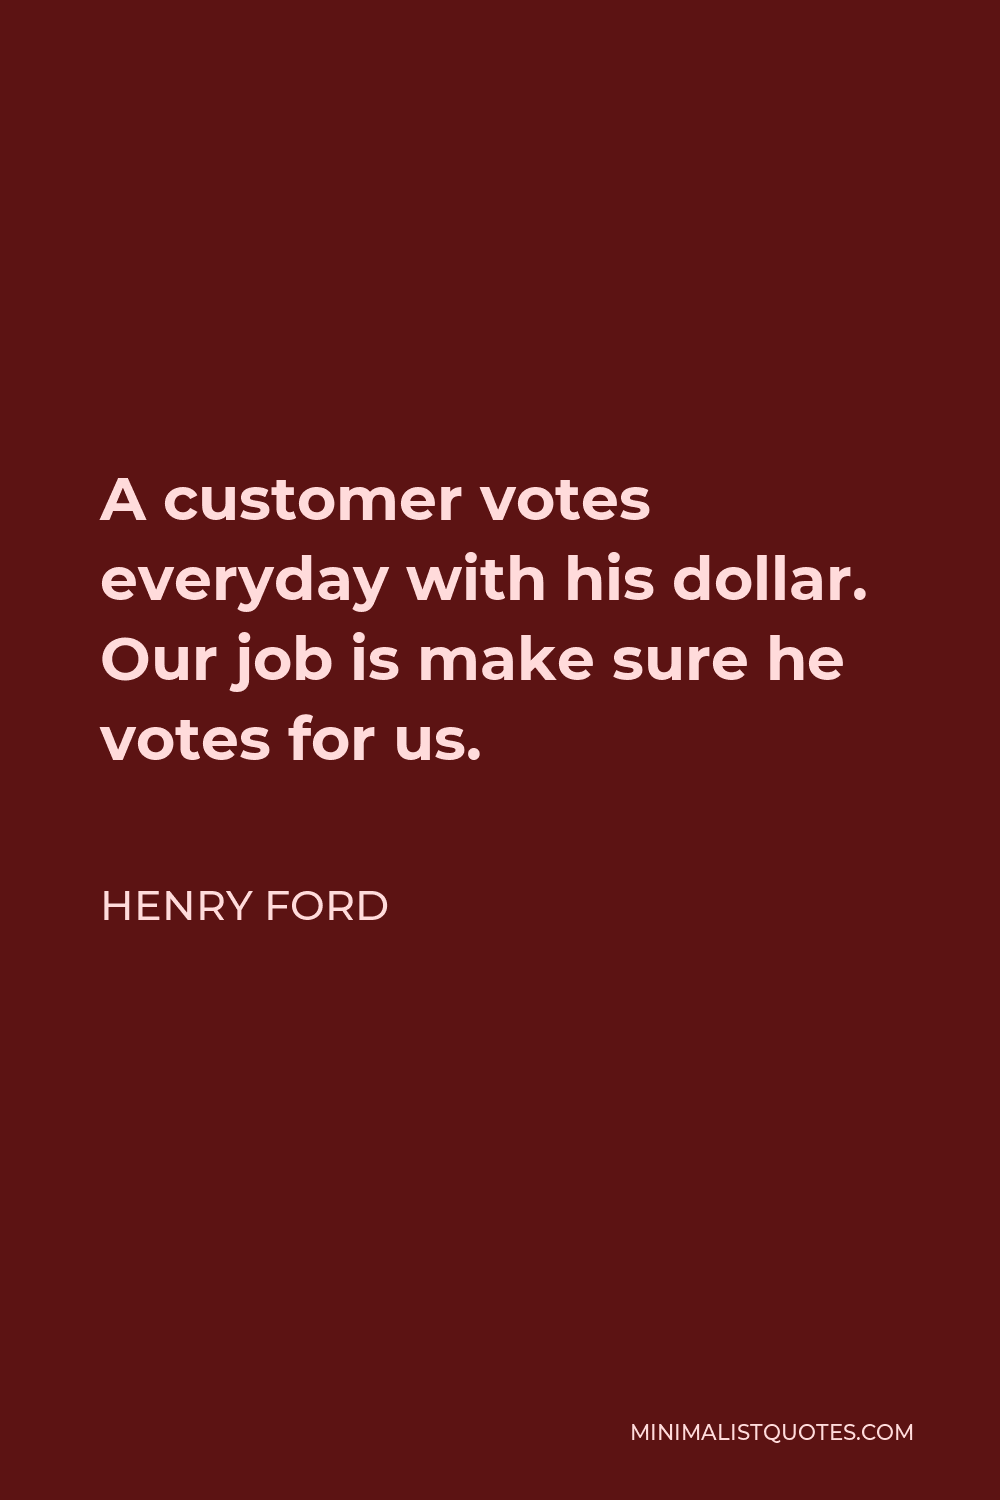 Henry Ford Quote - A customer votes everyday with his dollar. Our job is make sure he votes for us.